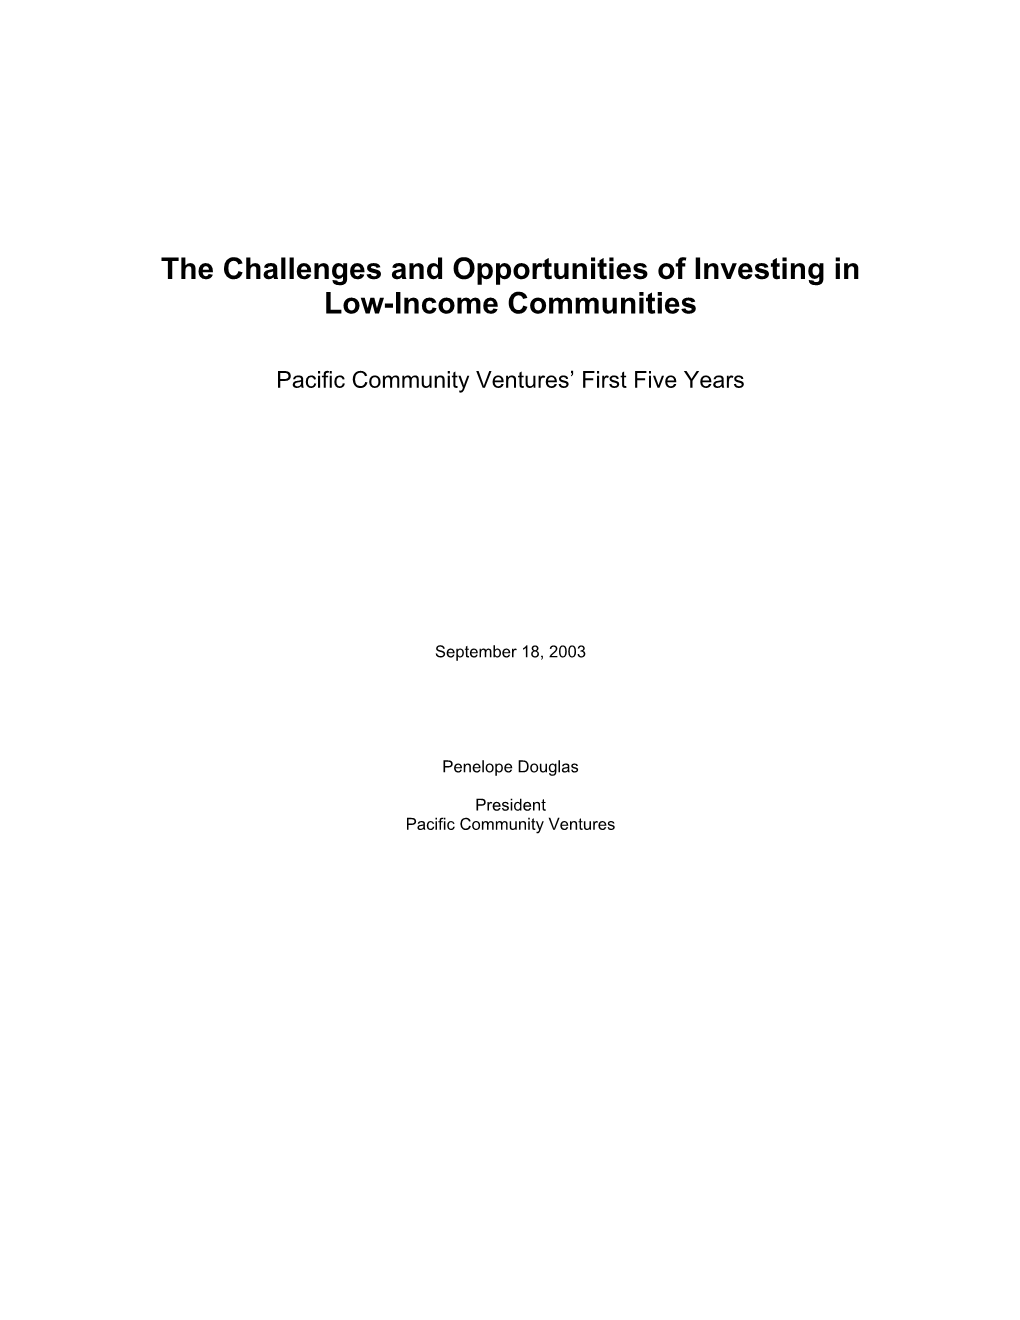 The Challenges and Opportunities of Investing in Low-Income Communities